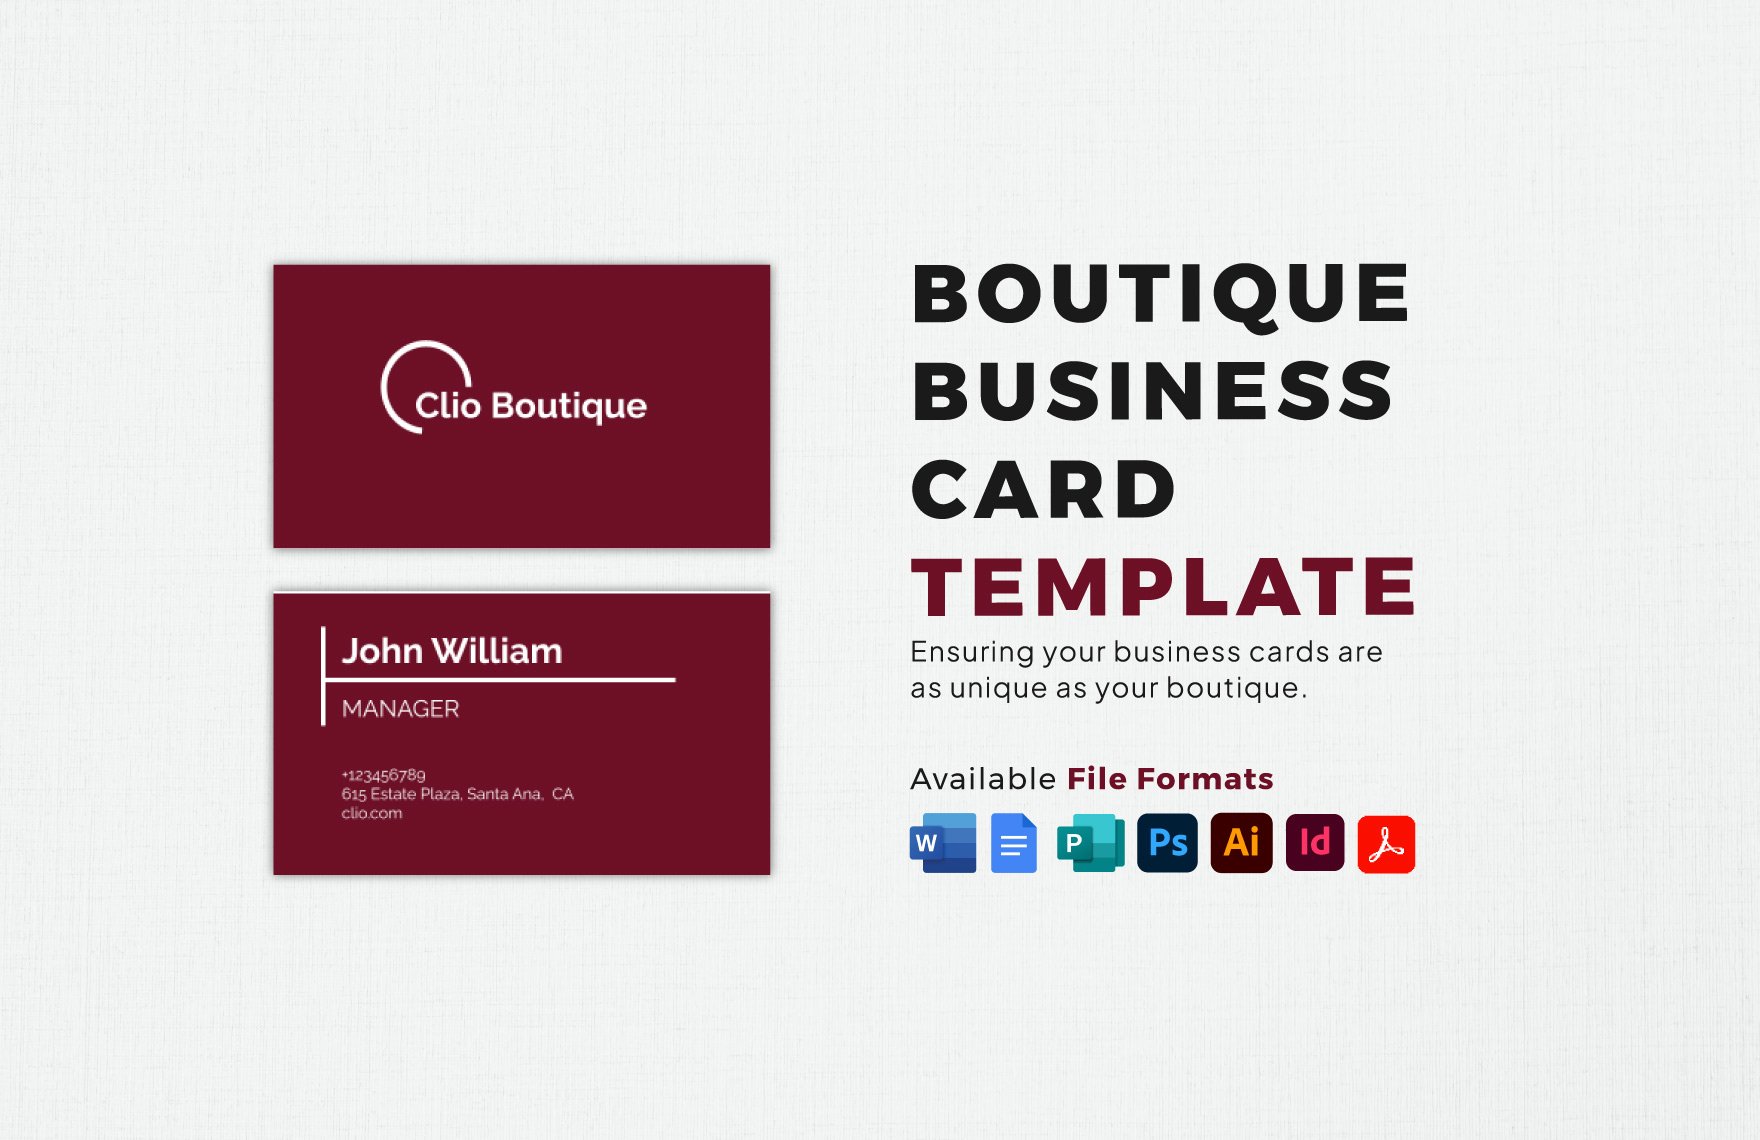 Boutique Business Card Template